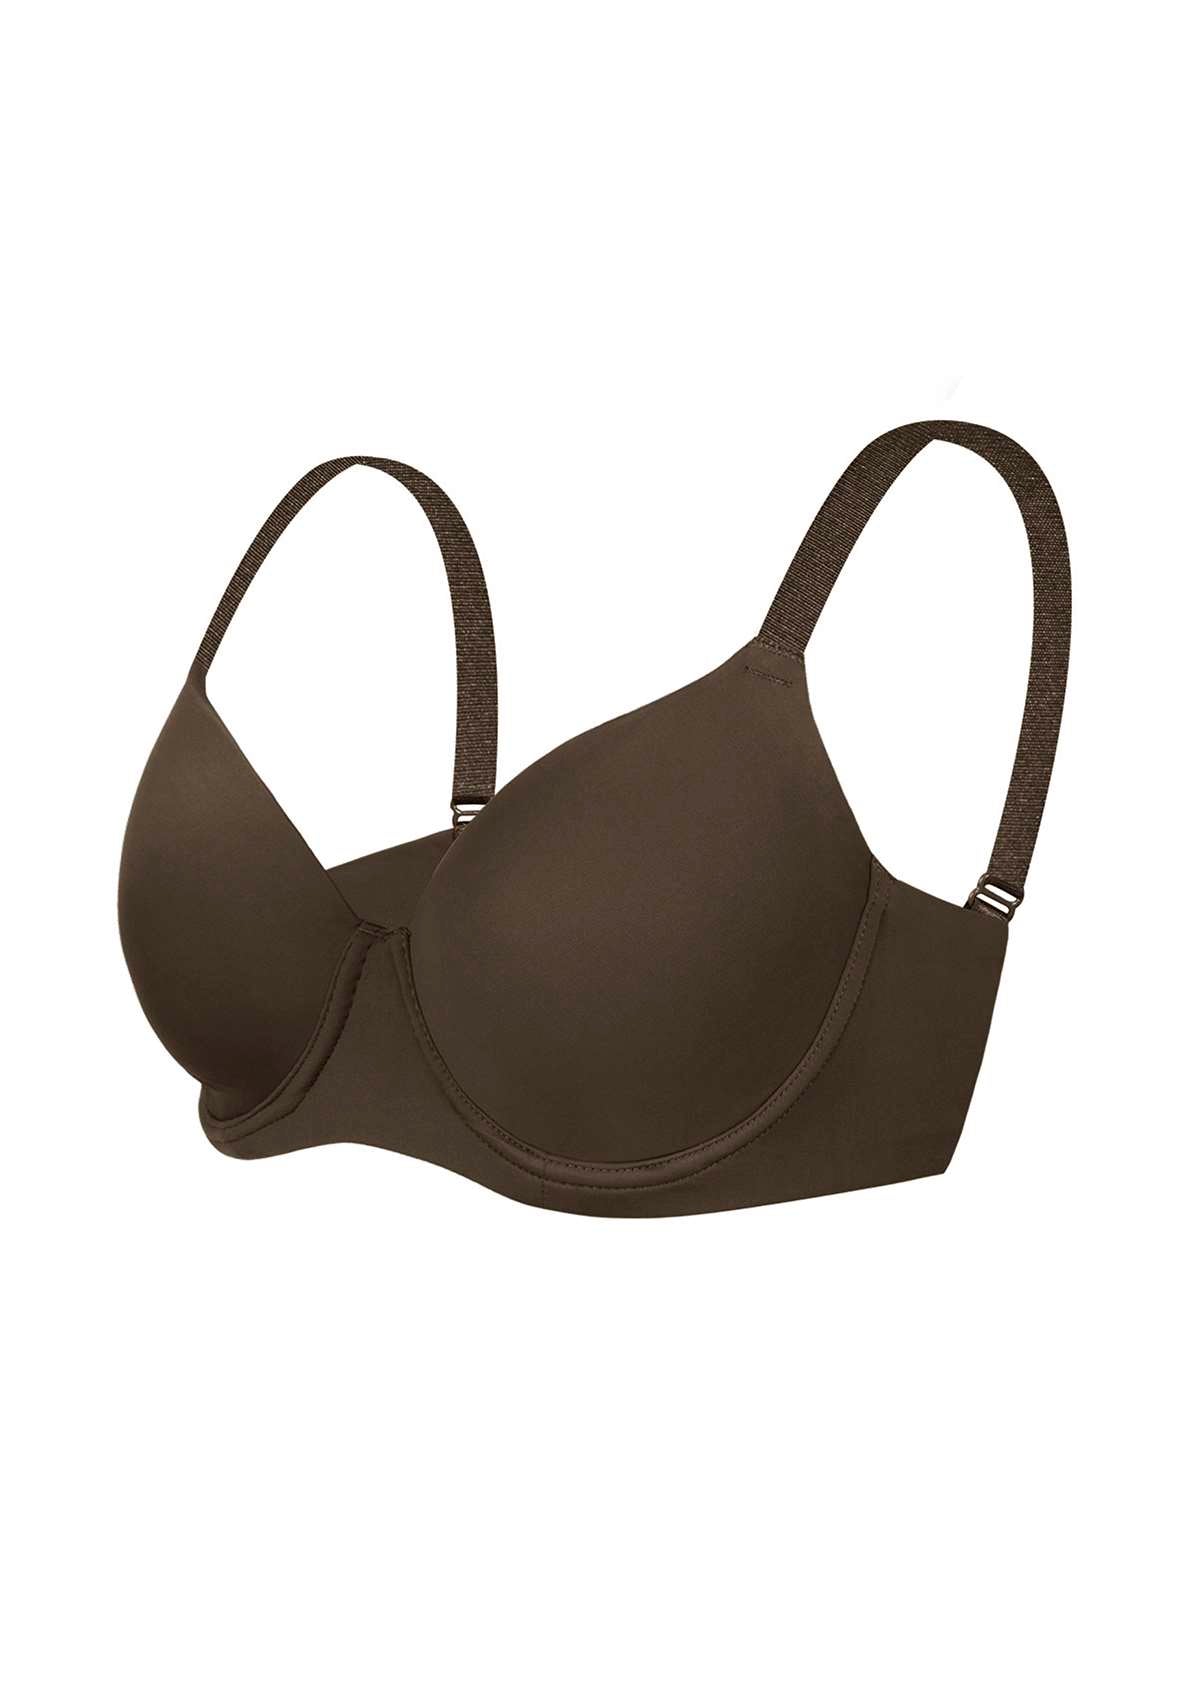 HSIA Gemma Smooth Supportive Padded T-shirt Bra - For Full Figures - Cocoa Brown / 36 / C